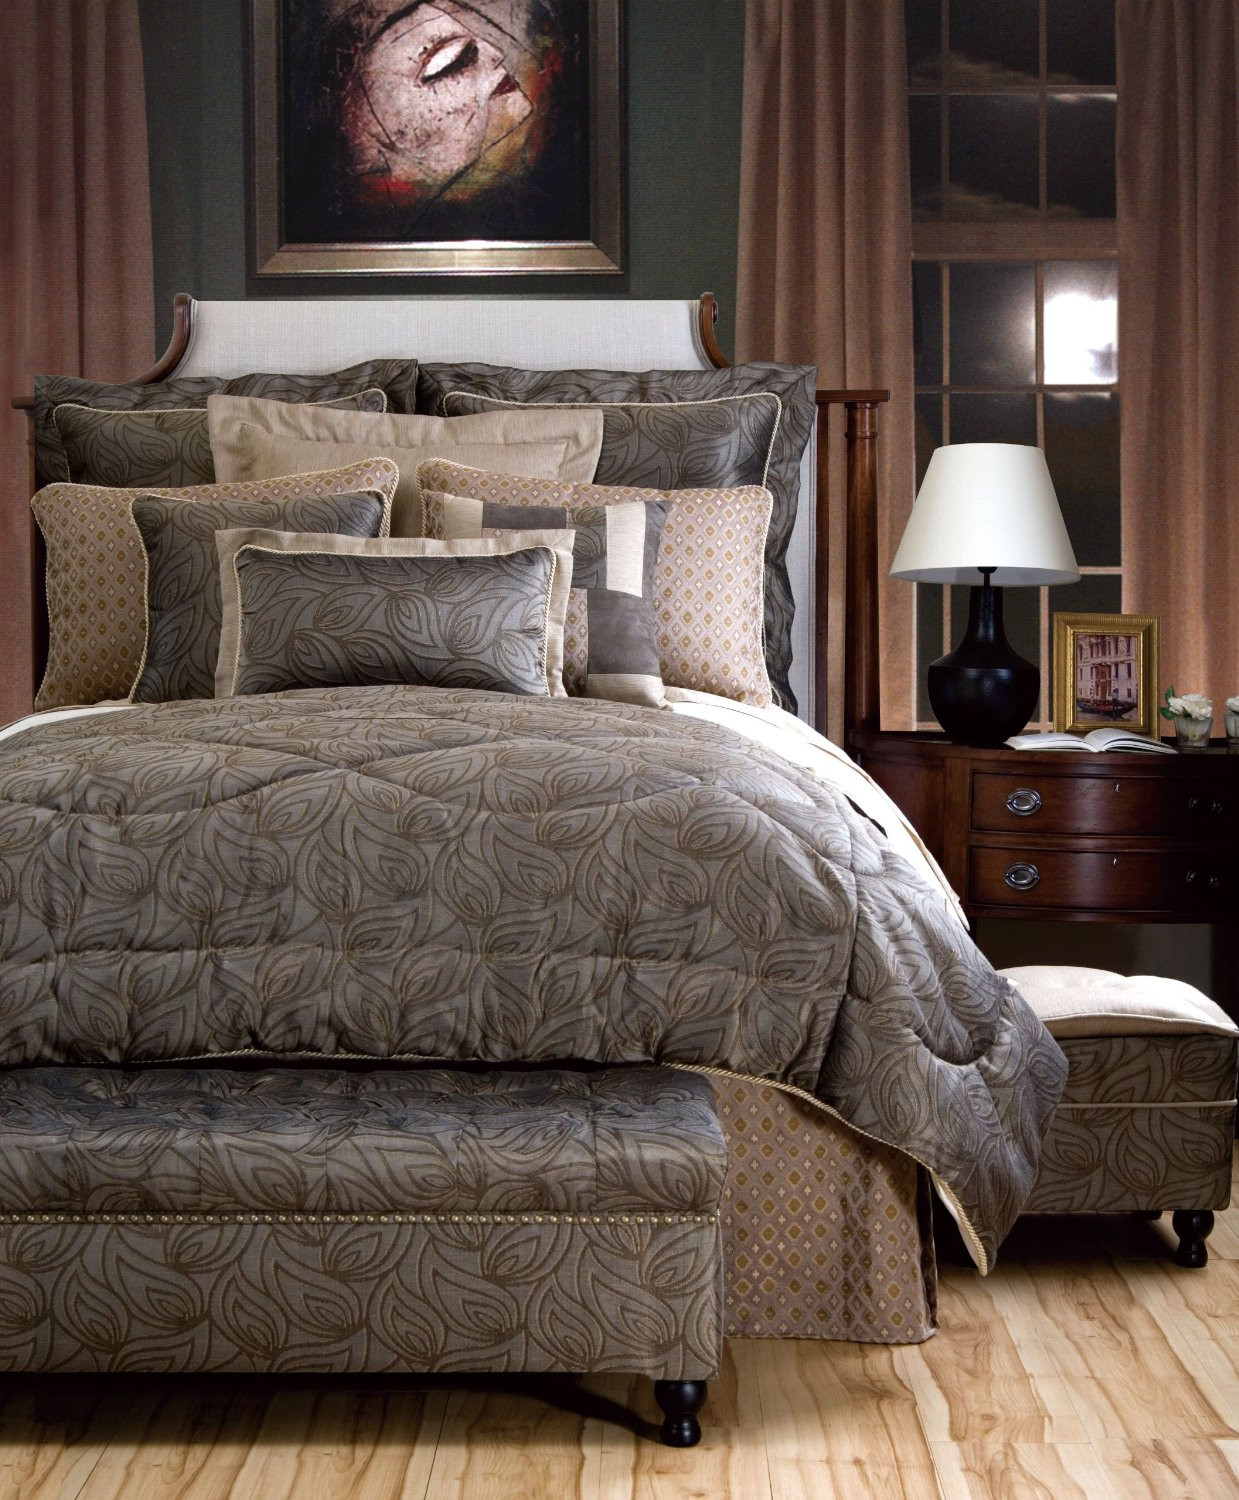 Master Bedroom Bedding
 How To Create a Luxury Master Bedroom